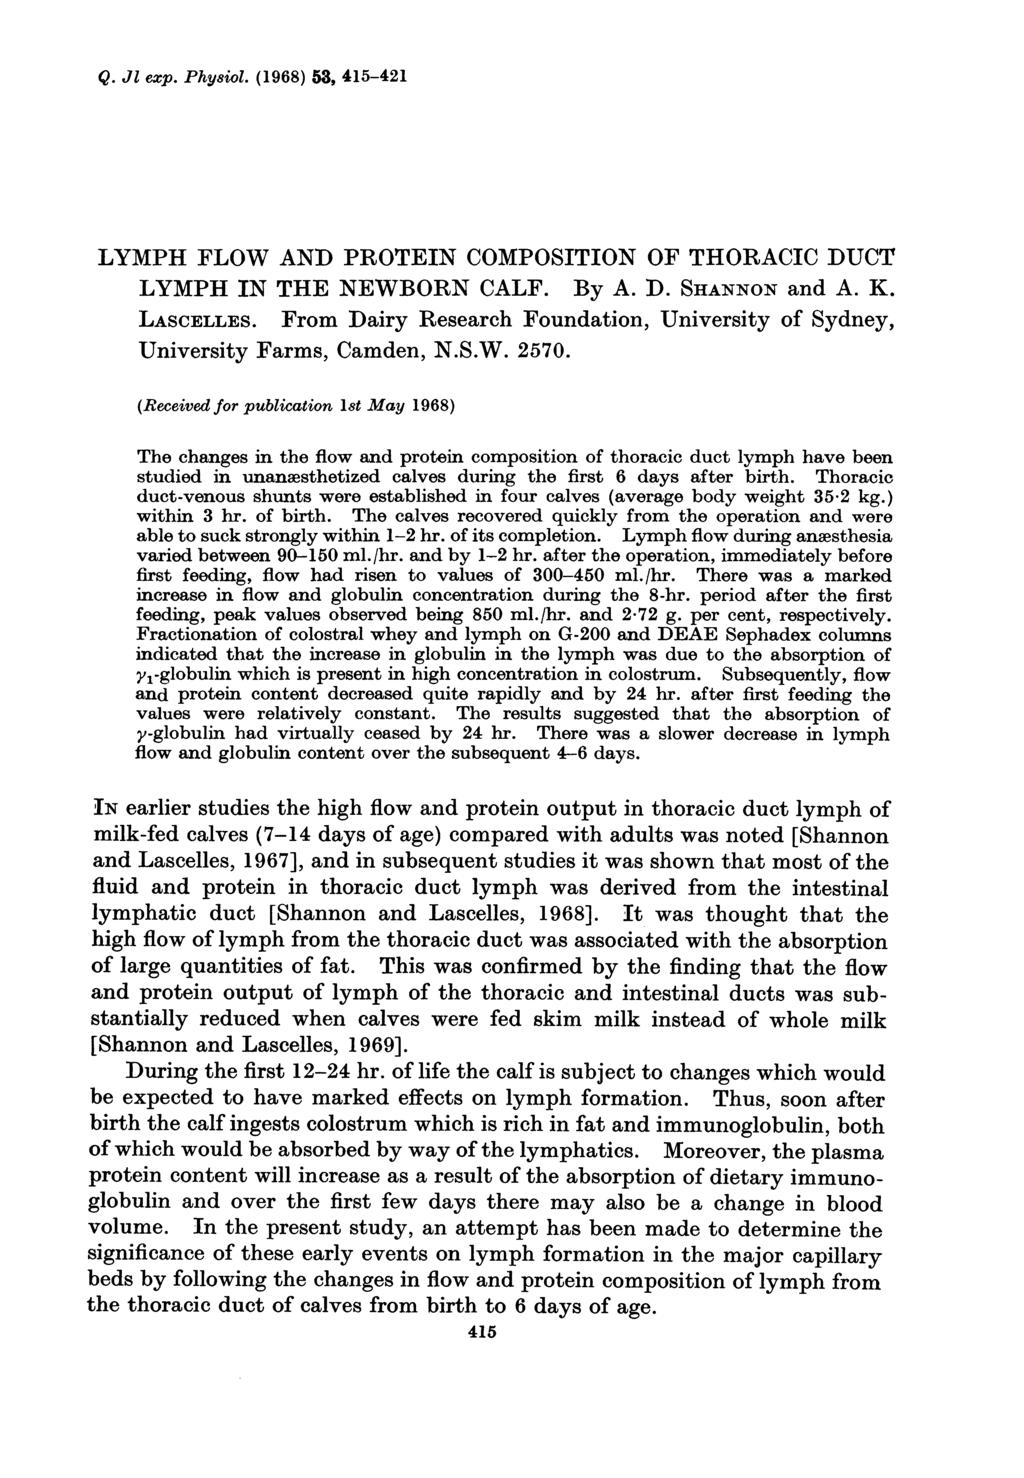 Q. Jl exp. Physiol. (1968) 53, 415-421 LYMPH FLOW AND PROTEIN COMPOSITION OF THORACIC DUCT LYMPH IN THE NEWBORN CALF. By A. D. SHANNON and A. K. LASCELLES.